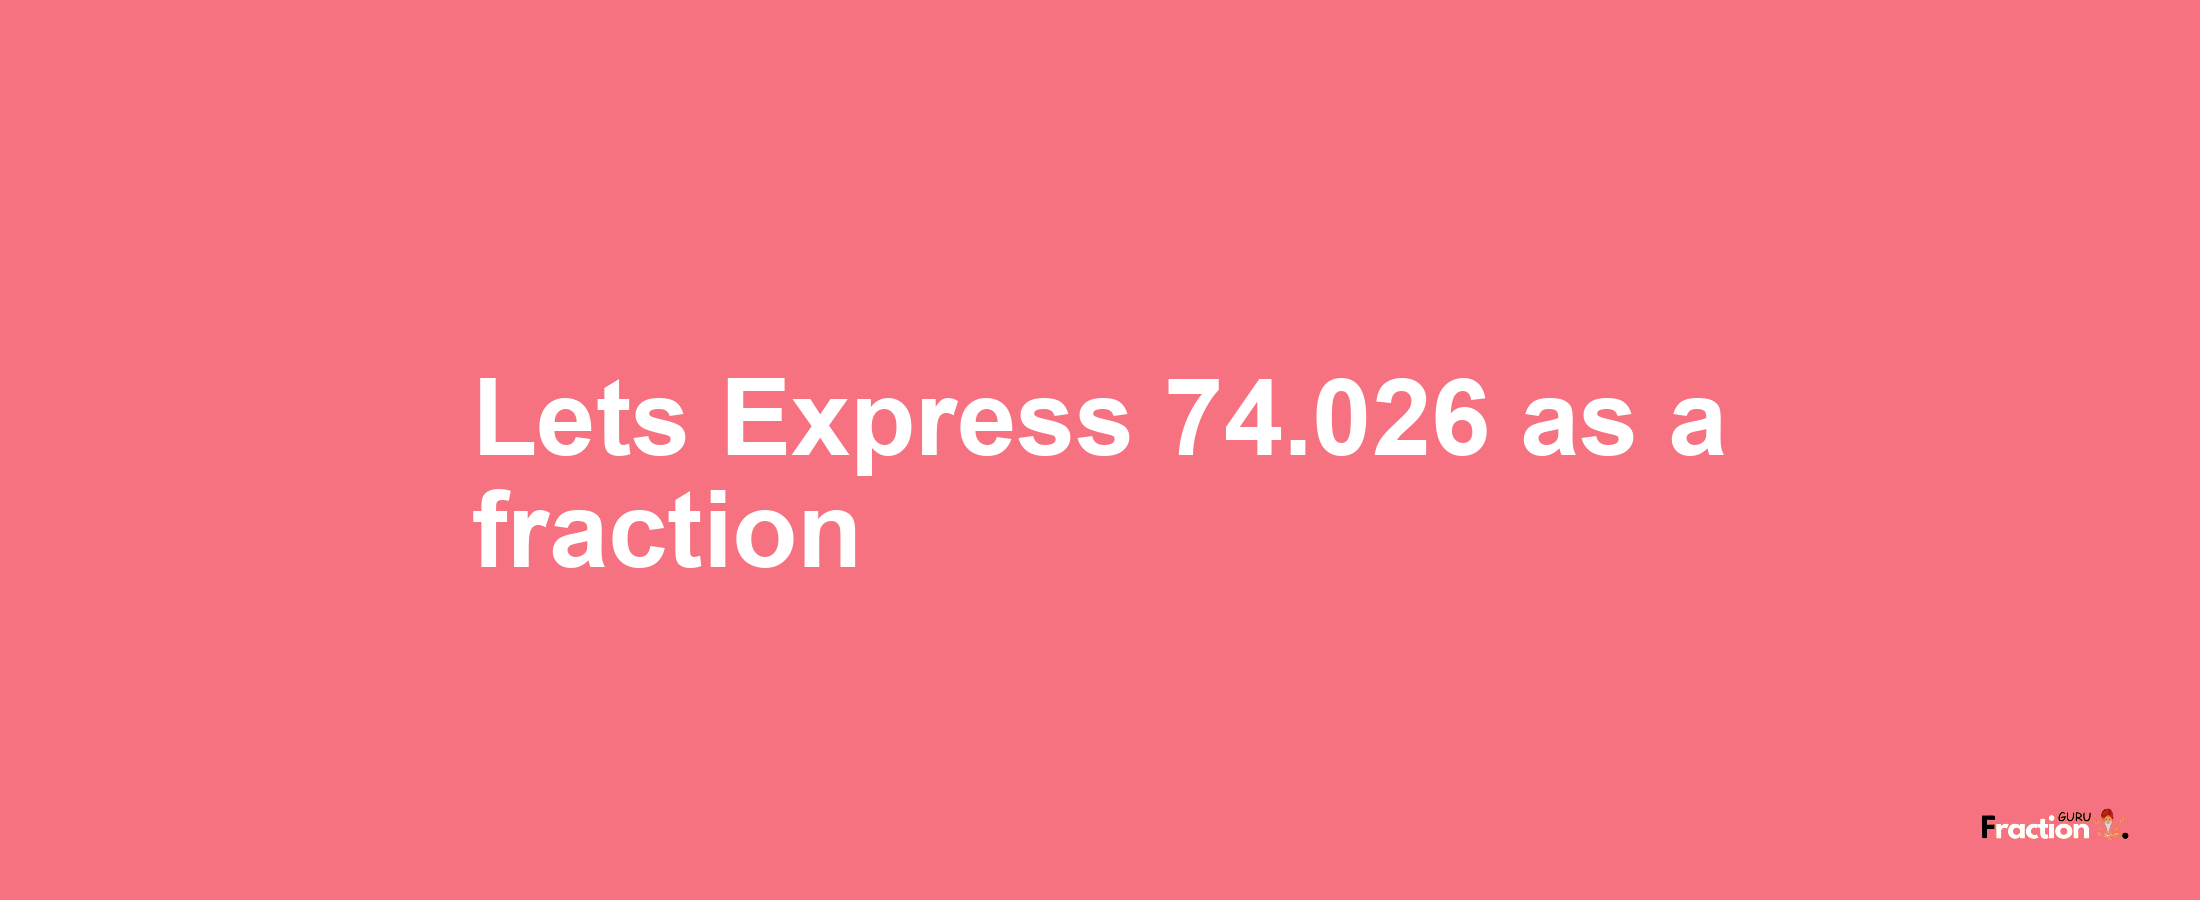 Lets Express 74.026 as afraction